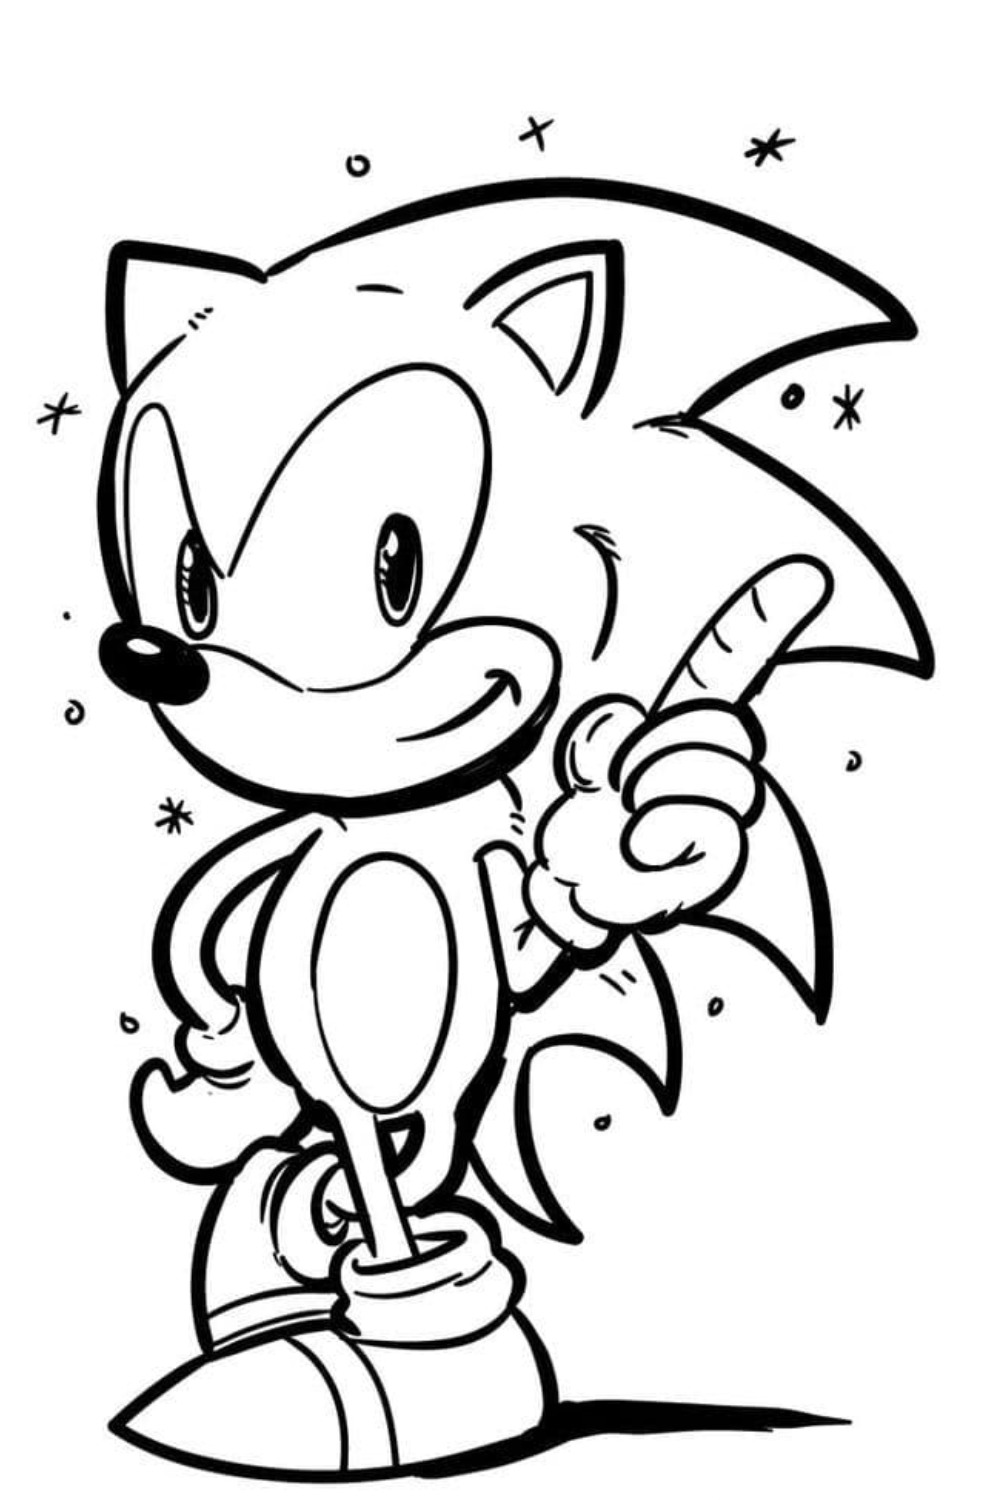 sonic the hedgehog coloring sheets